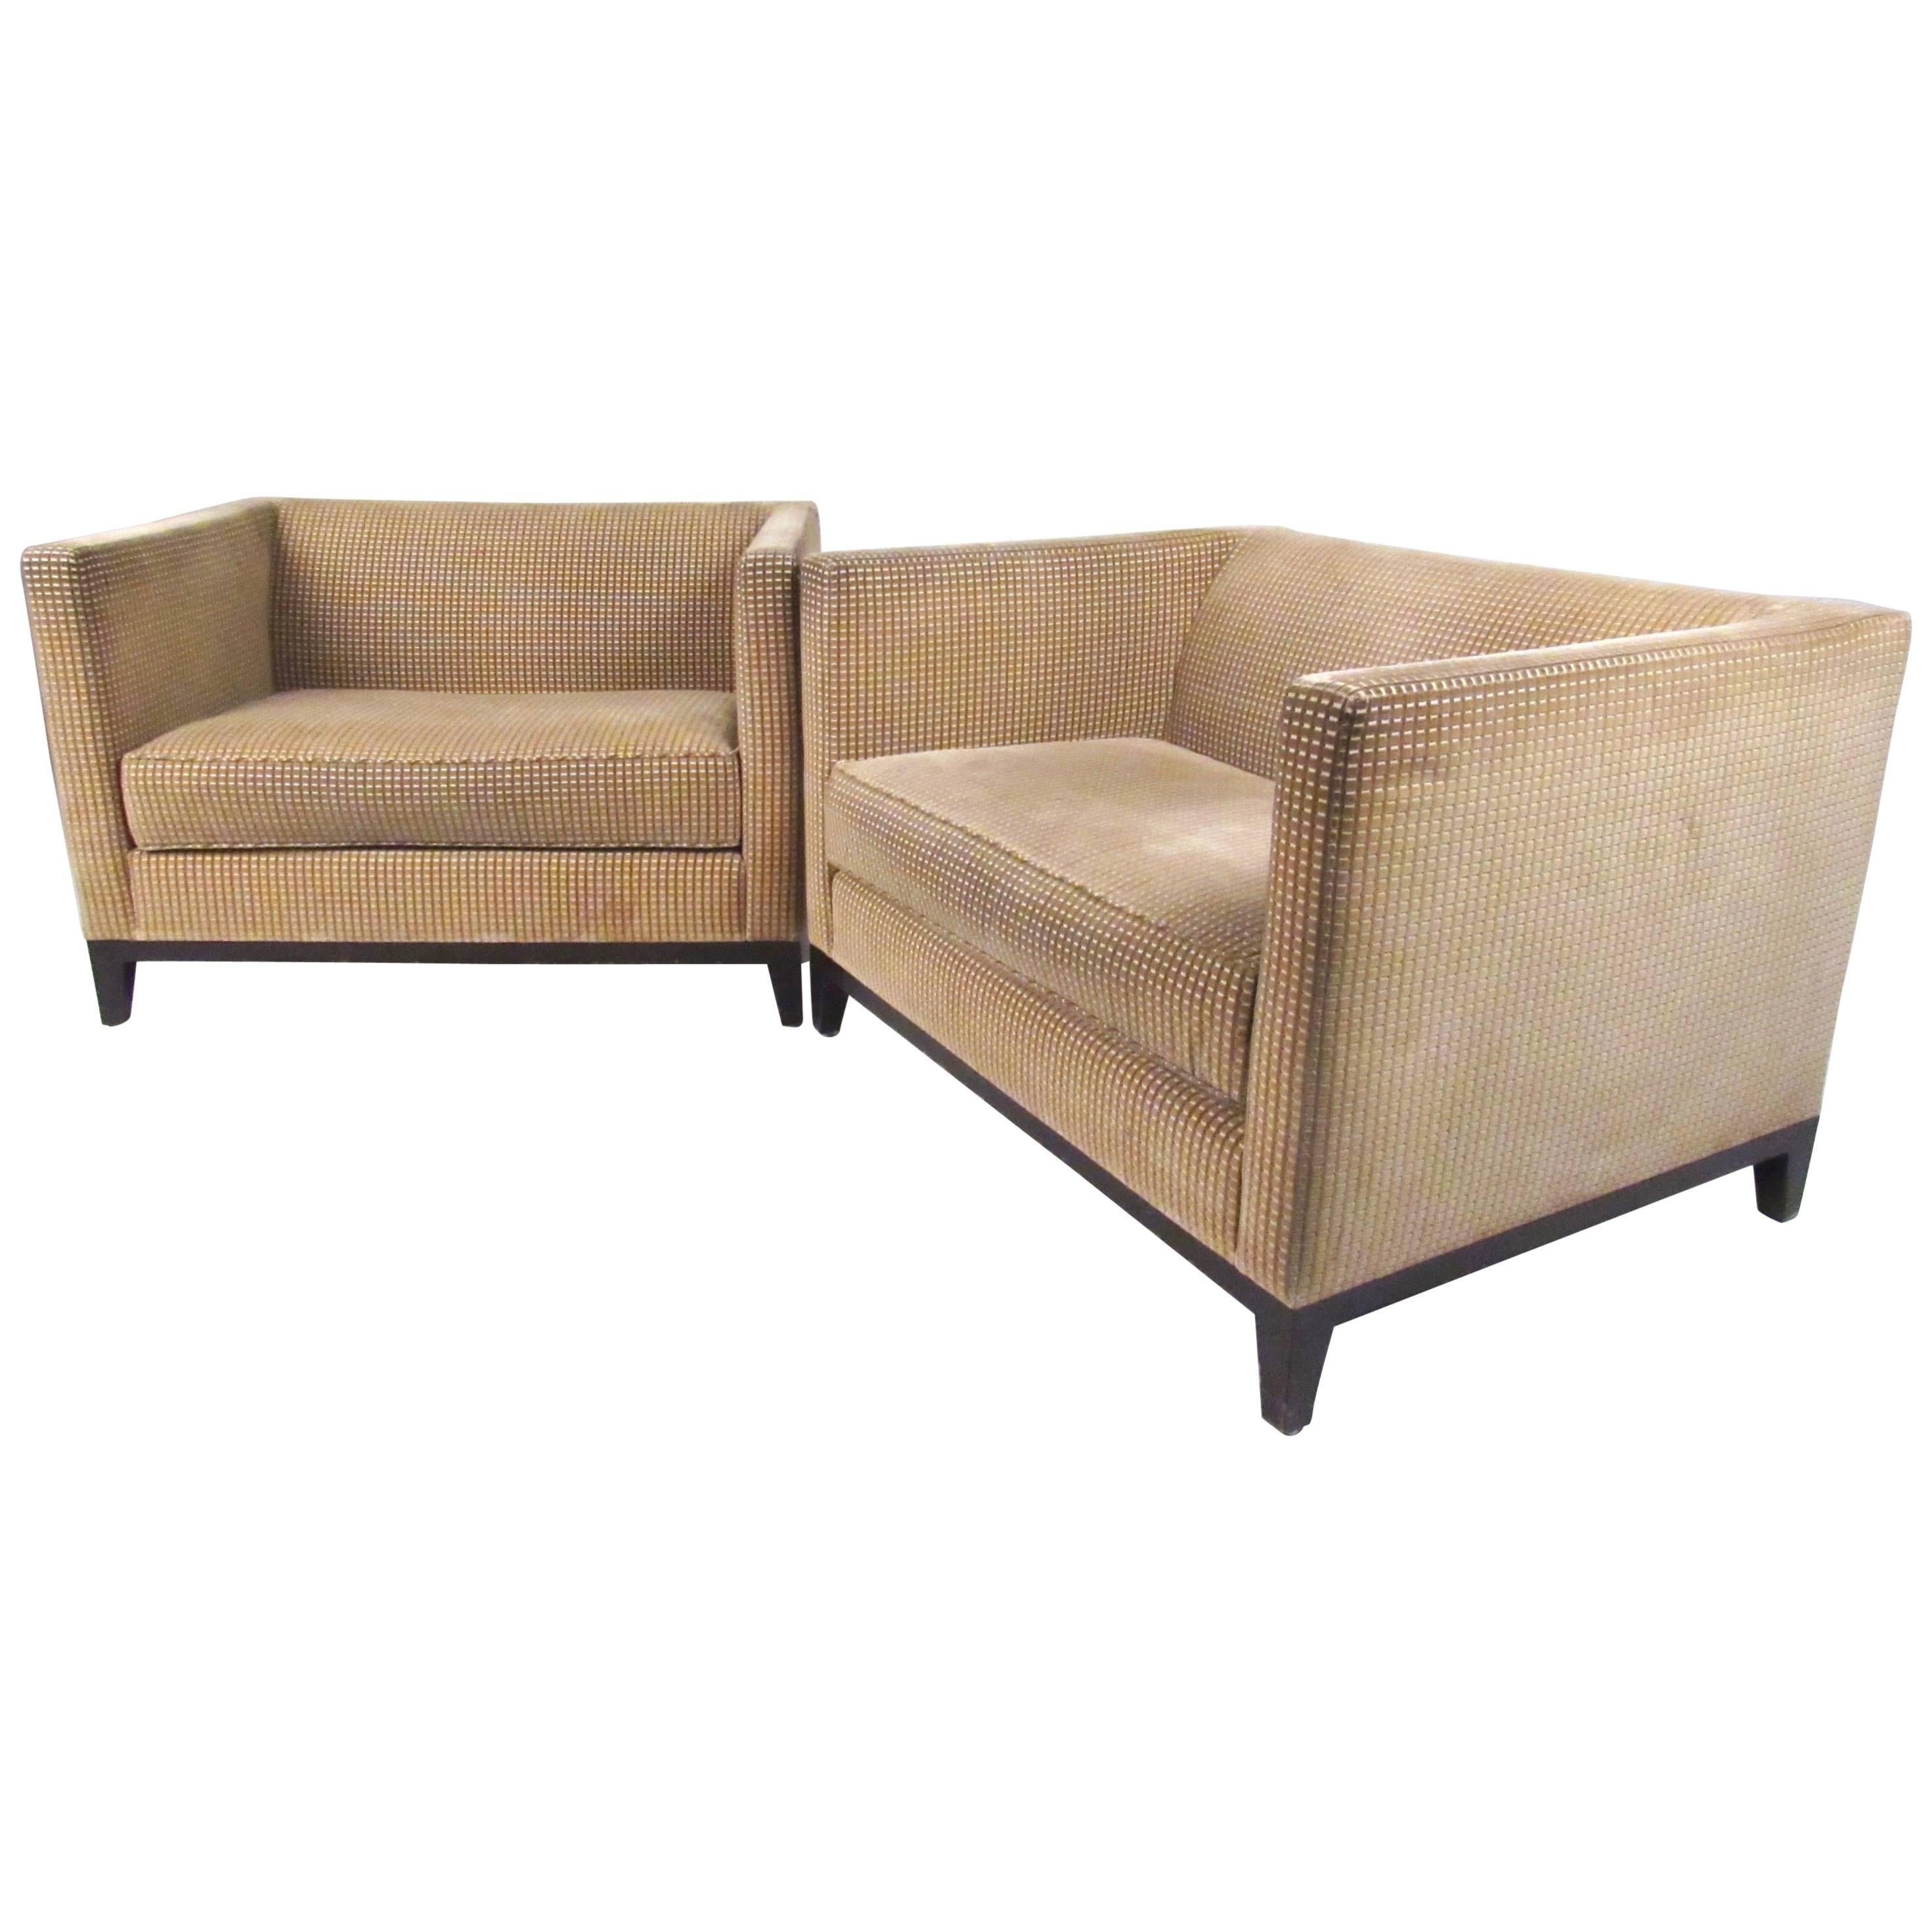 Pair of Stylish Modern Club Chairs by Christian Liaigre for Holly Hunt